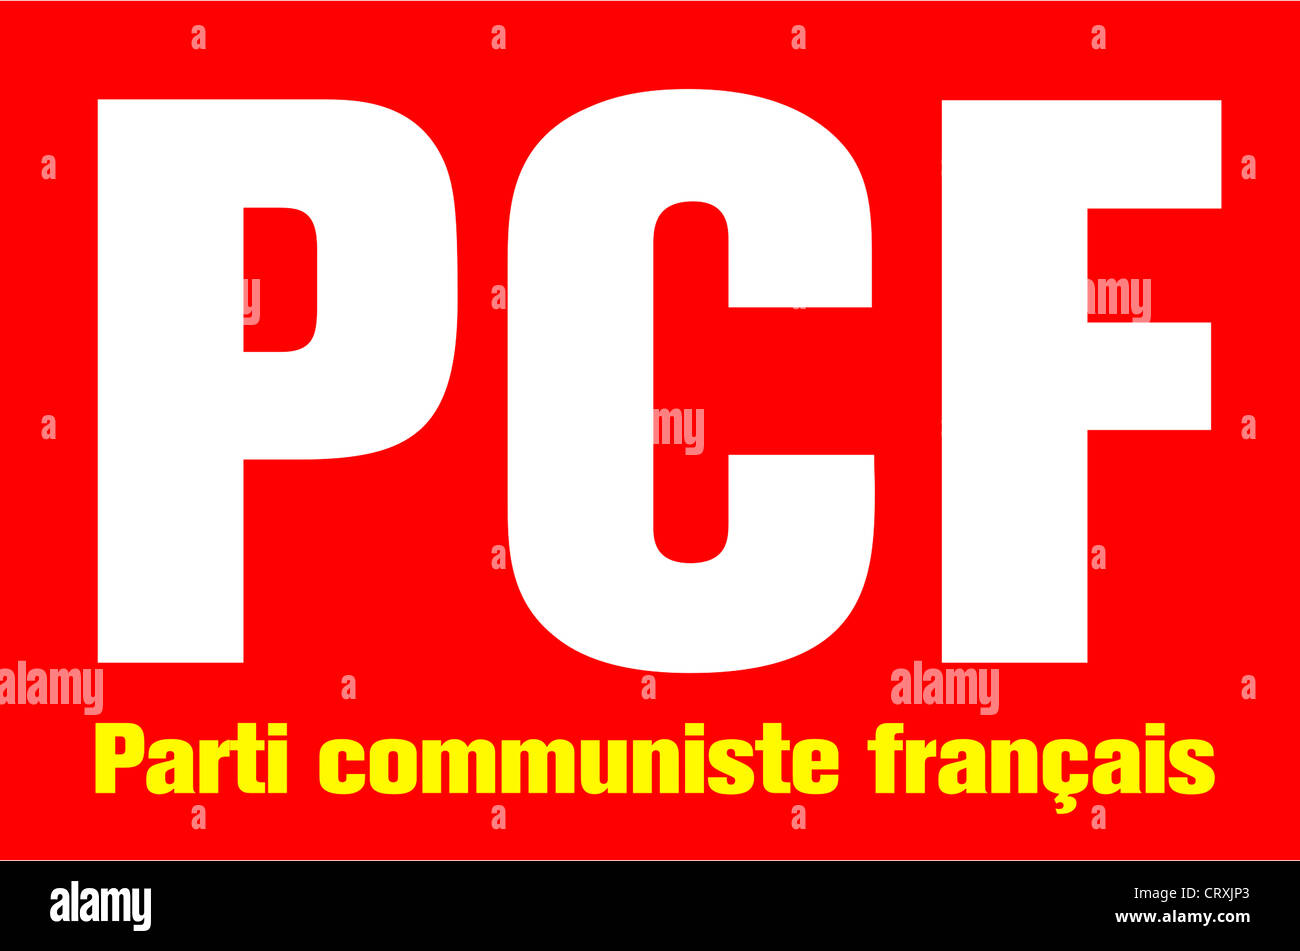 Logo of the French communist party PCF - Parti communiste francais. Stock Photo